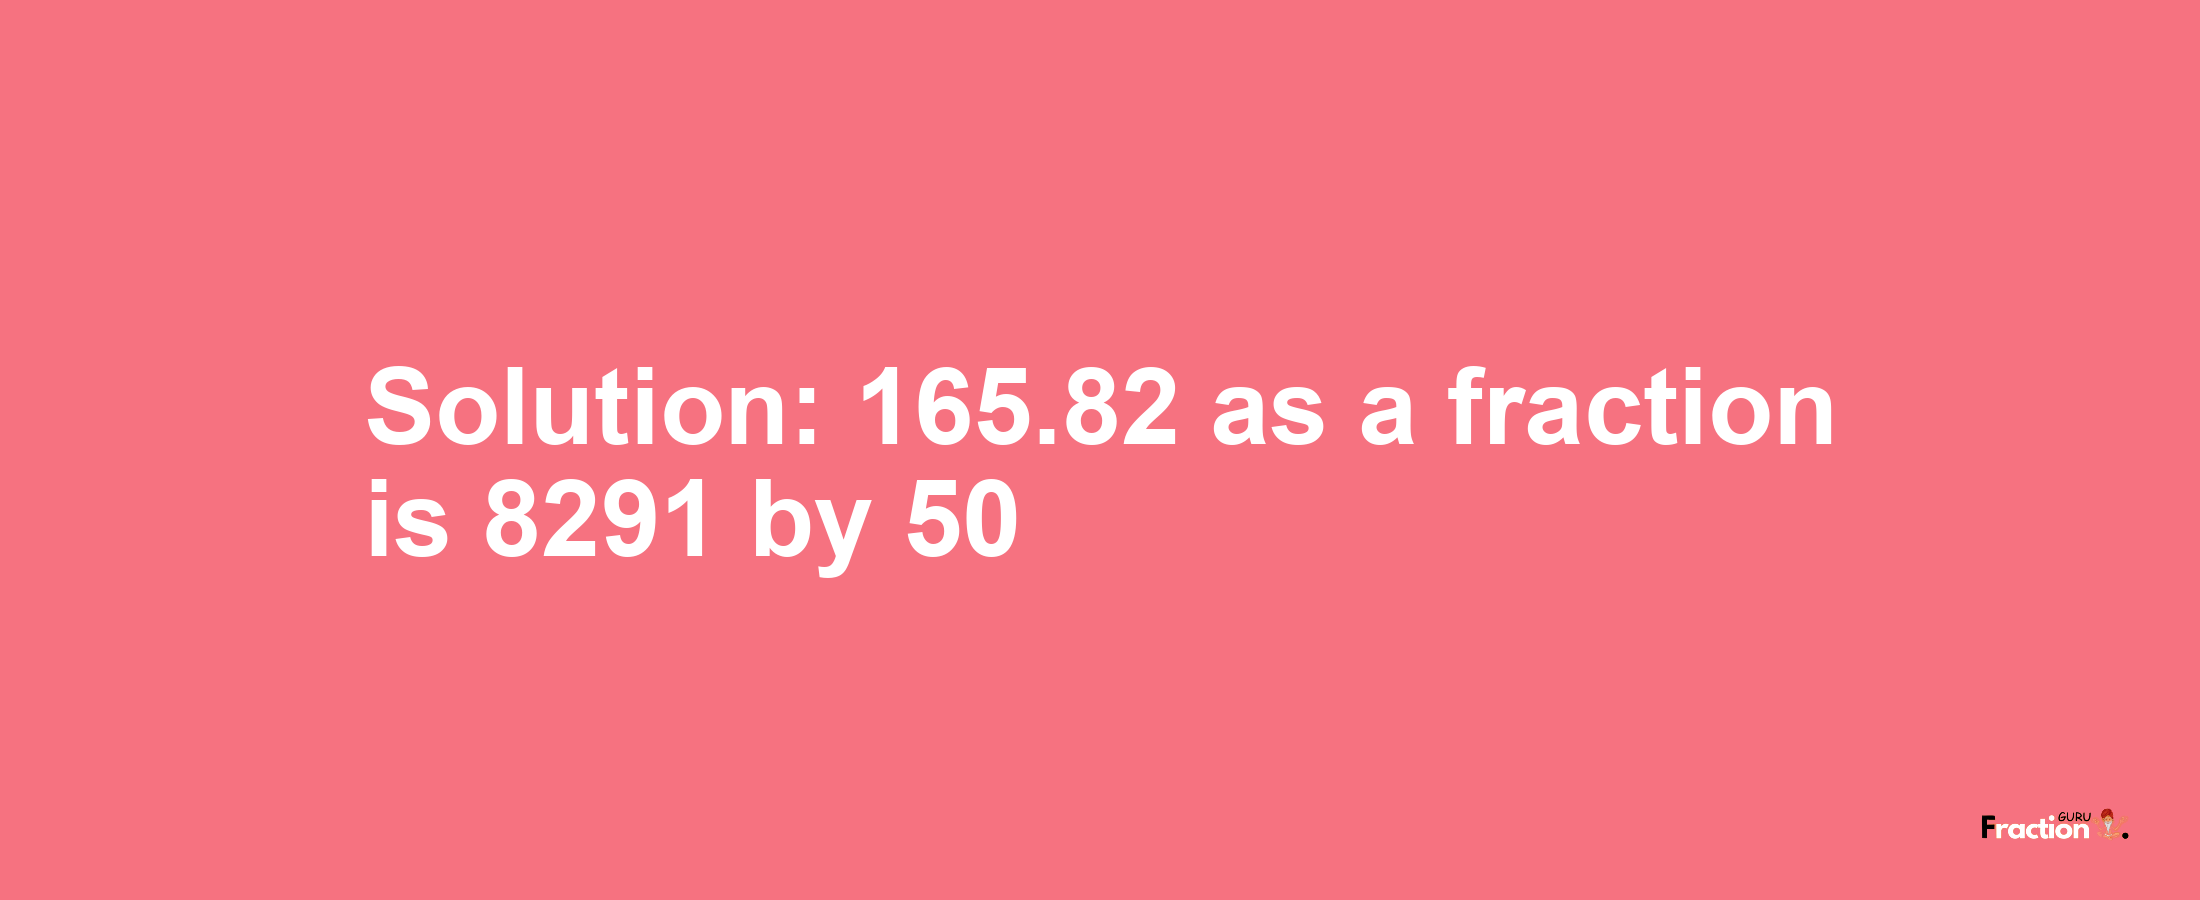 Solution:165.82 as a fraction is 8291/50